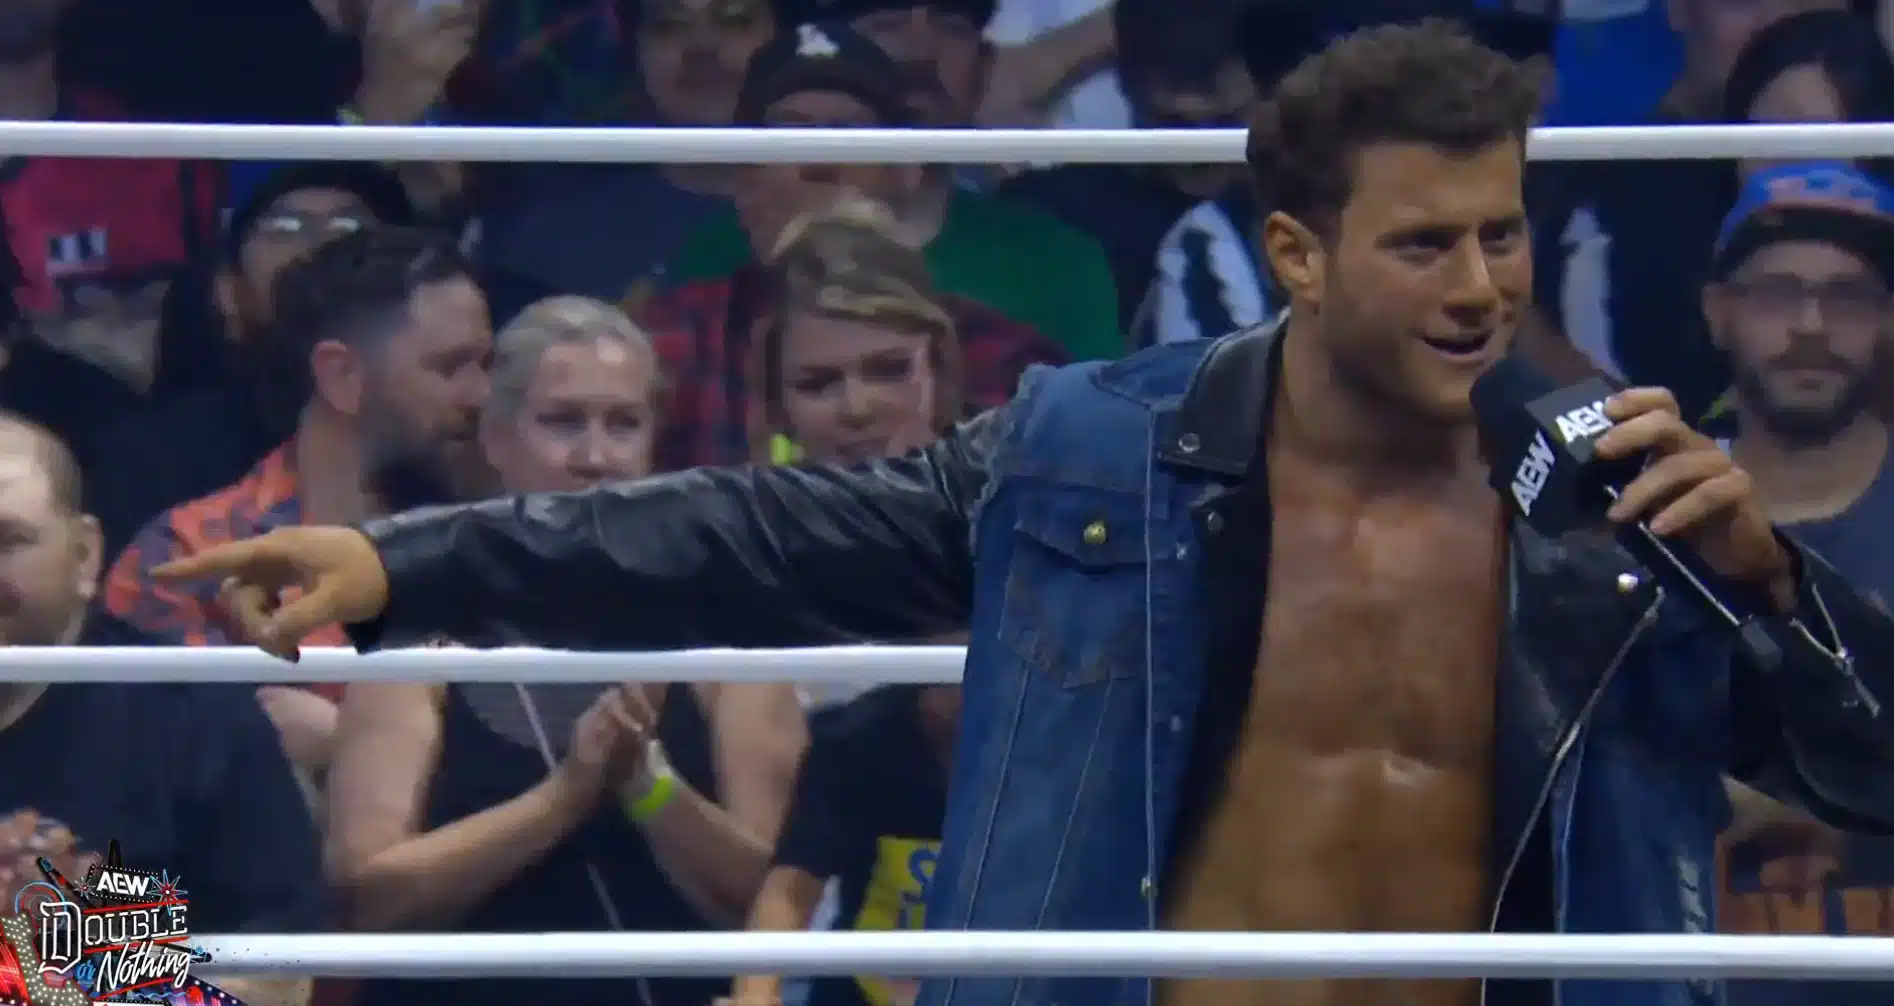 MJF shocks everyone by entering the ring at AEW’s Double or Nothing Pay-Per-View